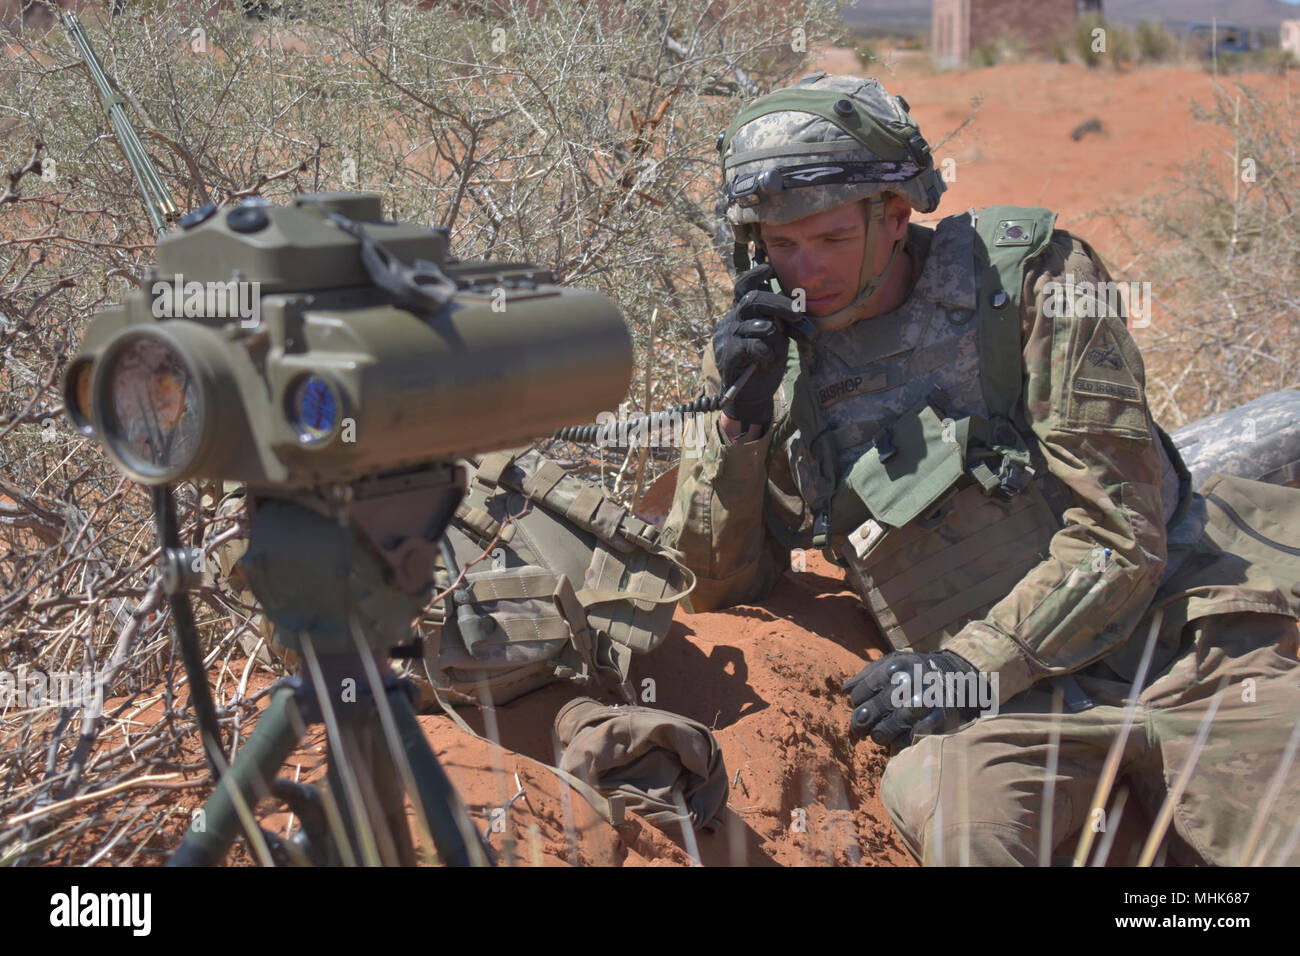 Pfc. Kaleb Bishop, a fire support specialist with 2nd Battery, 3rd Field Artillery Regiment, 1st Armored Division Artillery, communicates a situation report after scanning his sector with a Lightweight Laser Designator Rangefinder at the Combined Arms Collective Training Facility, Orogrande, N.M., March 22, 2018. Bishop’s unit took the role of opposing force in Iron Focus 18.1, a major training event in which various units of Fort Bliss took part of. (U.S. Army Stock Photo